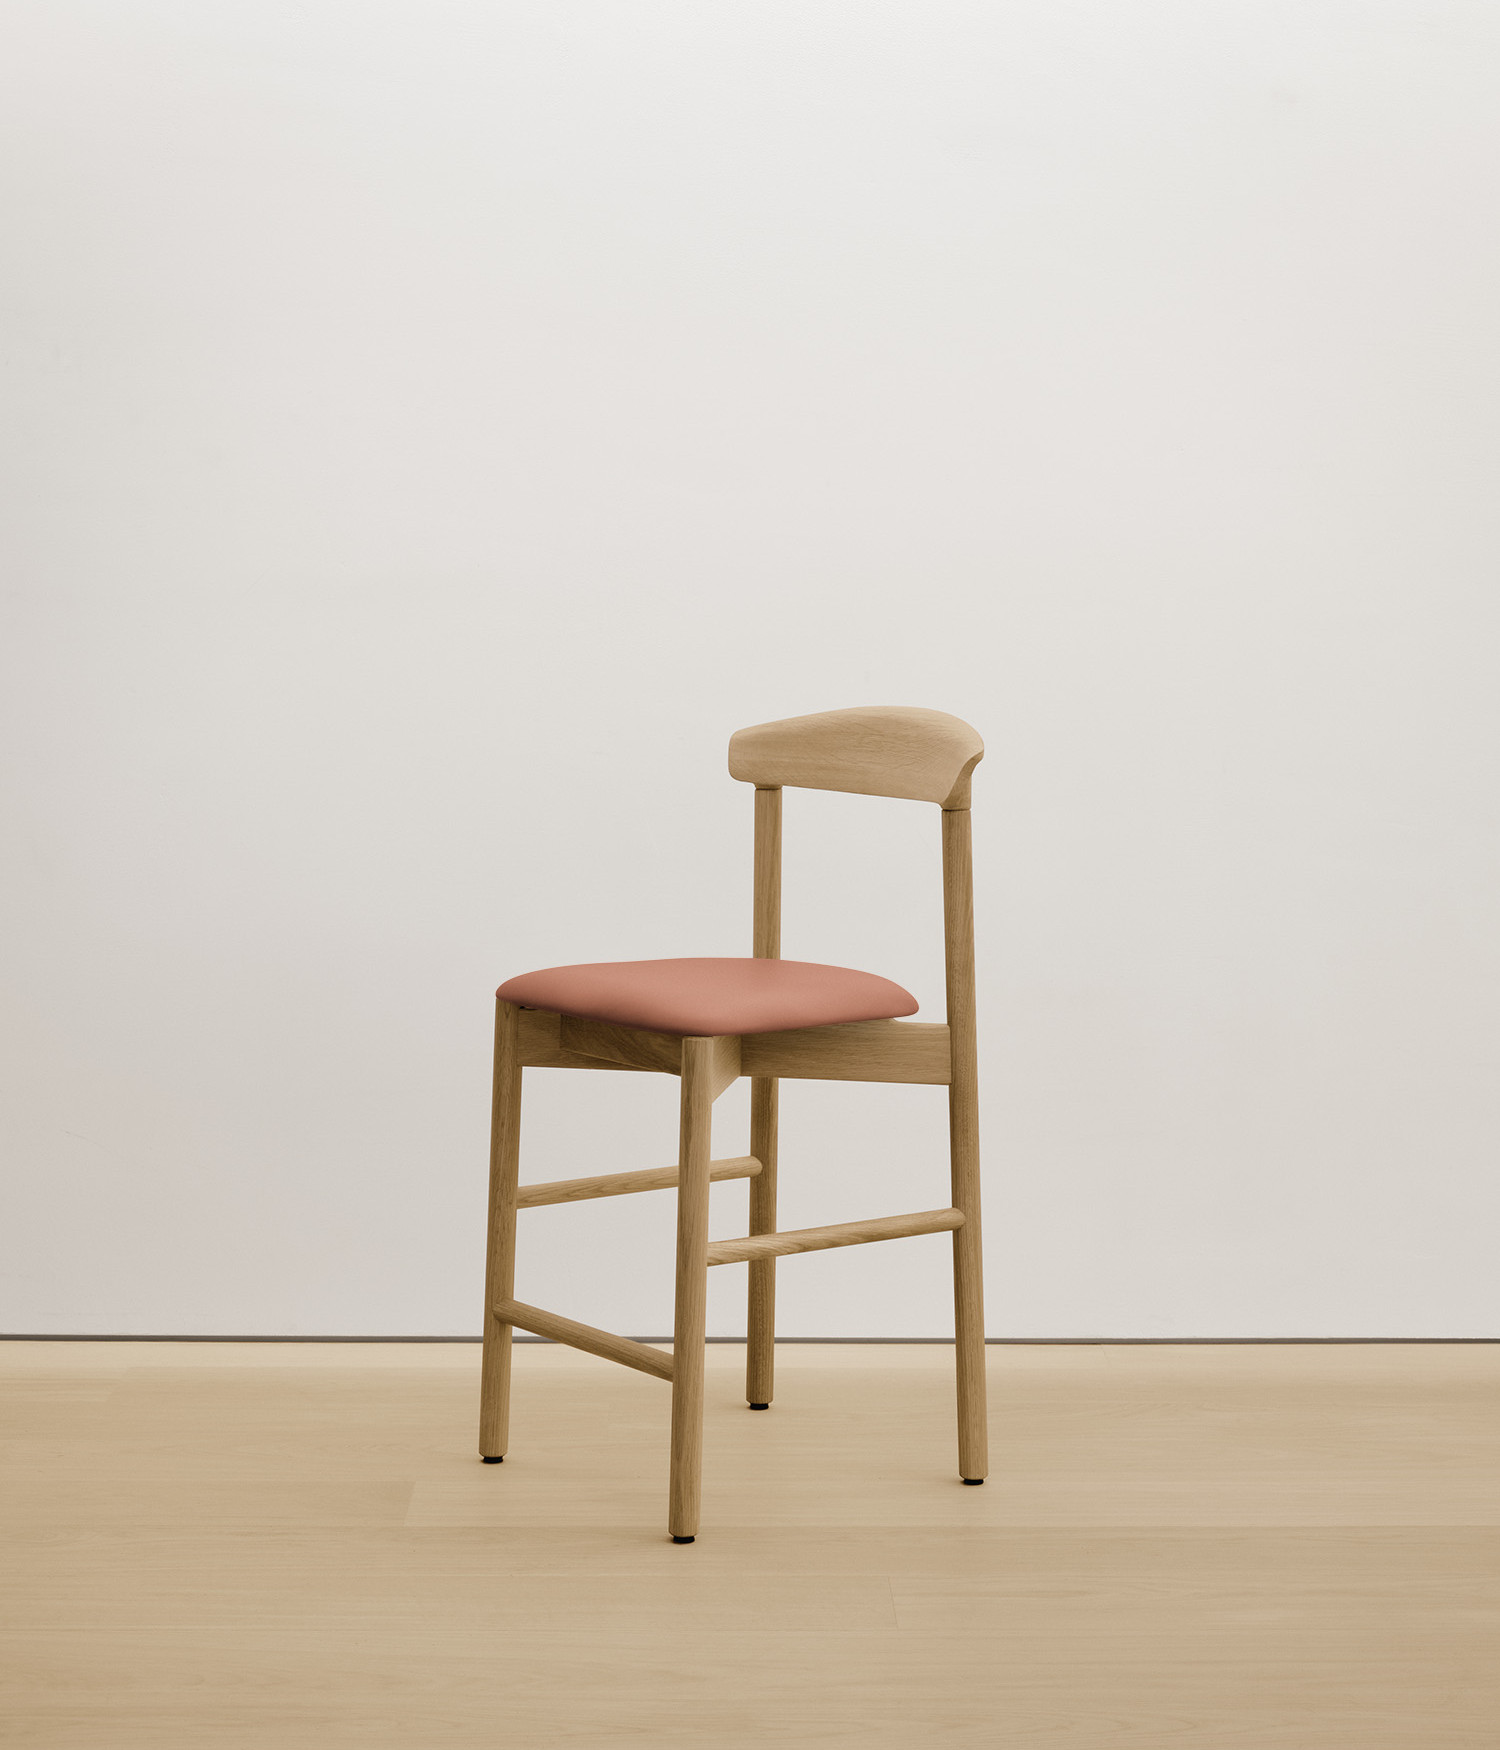  white-oak stool with clay color upholstered seat